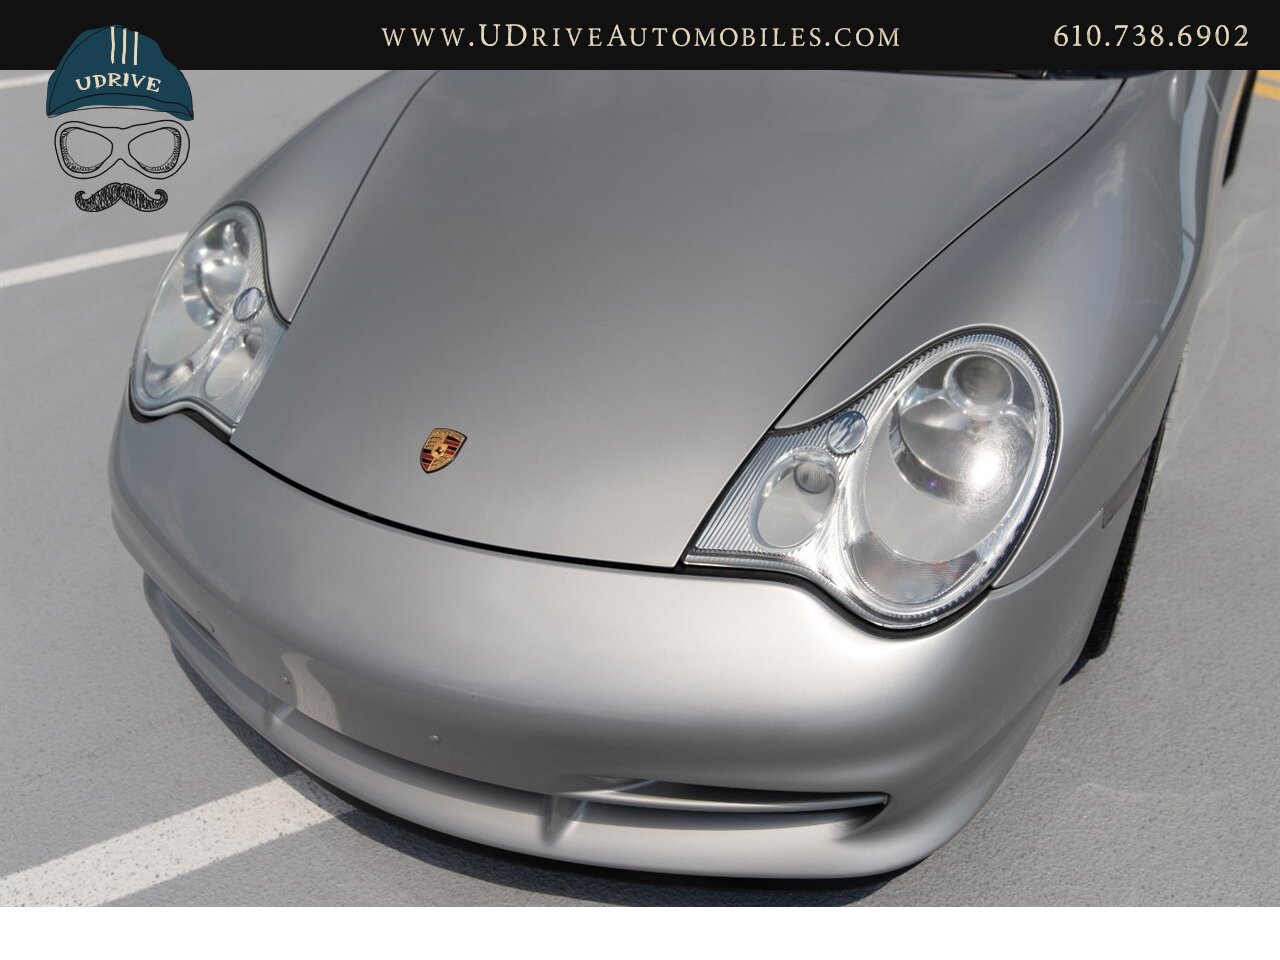 2004 Porsche 911 GT3 18k Miles Sport Seats Painted Hardback Seats  Thicker Steering Wheel Xenon Headlamps - Photo 12 - West Chester, PA 19382